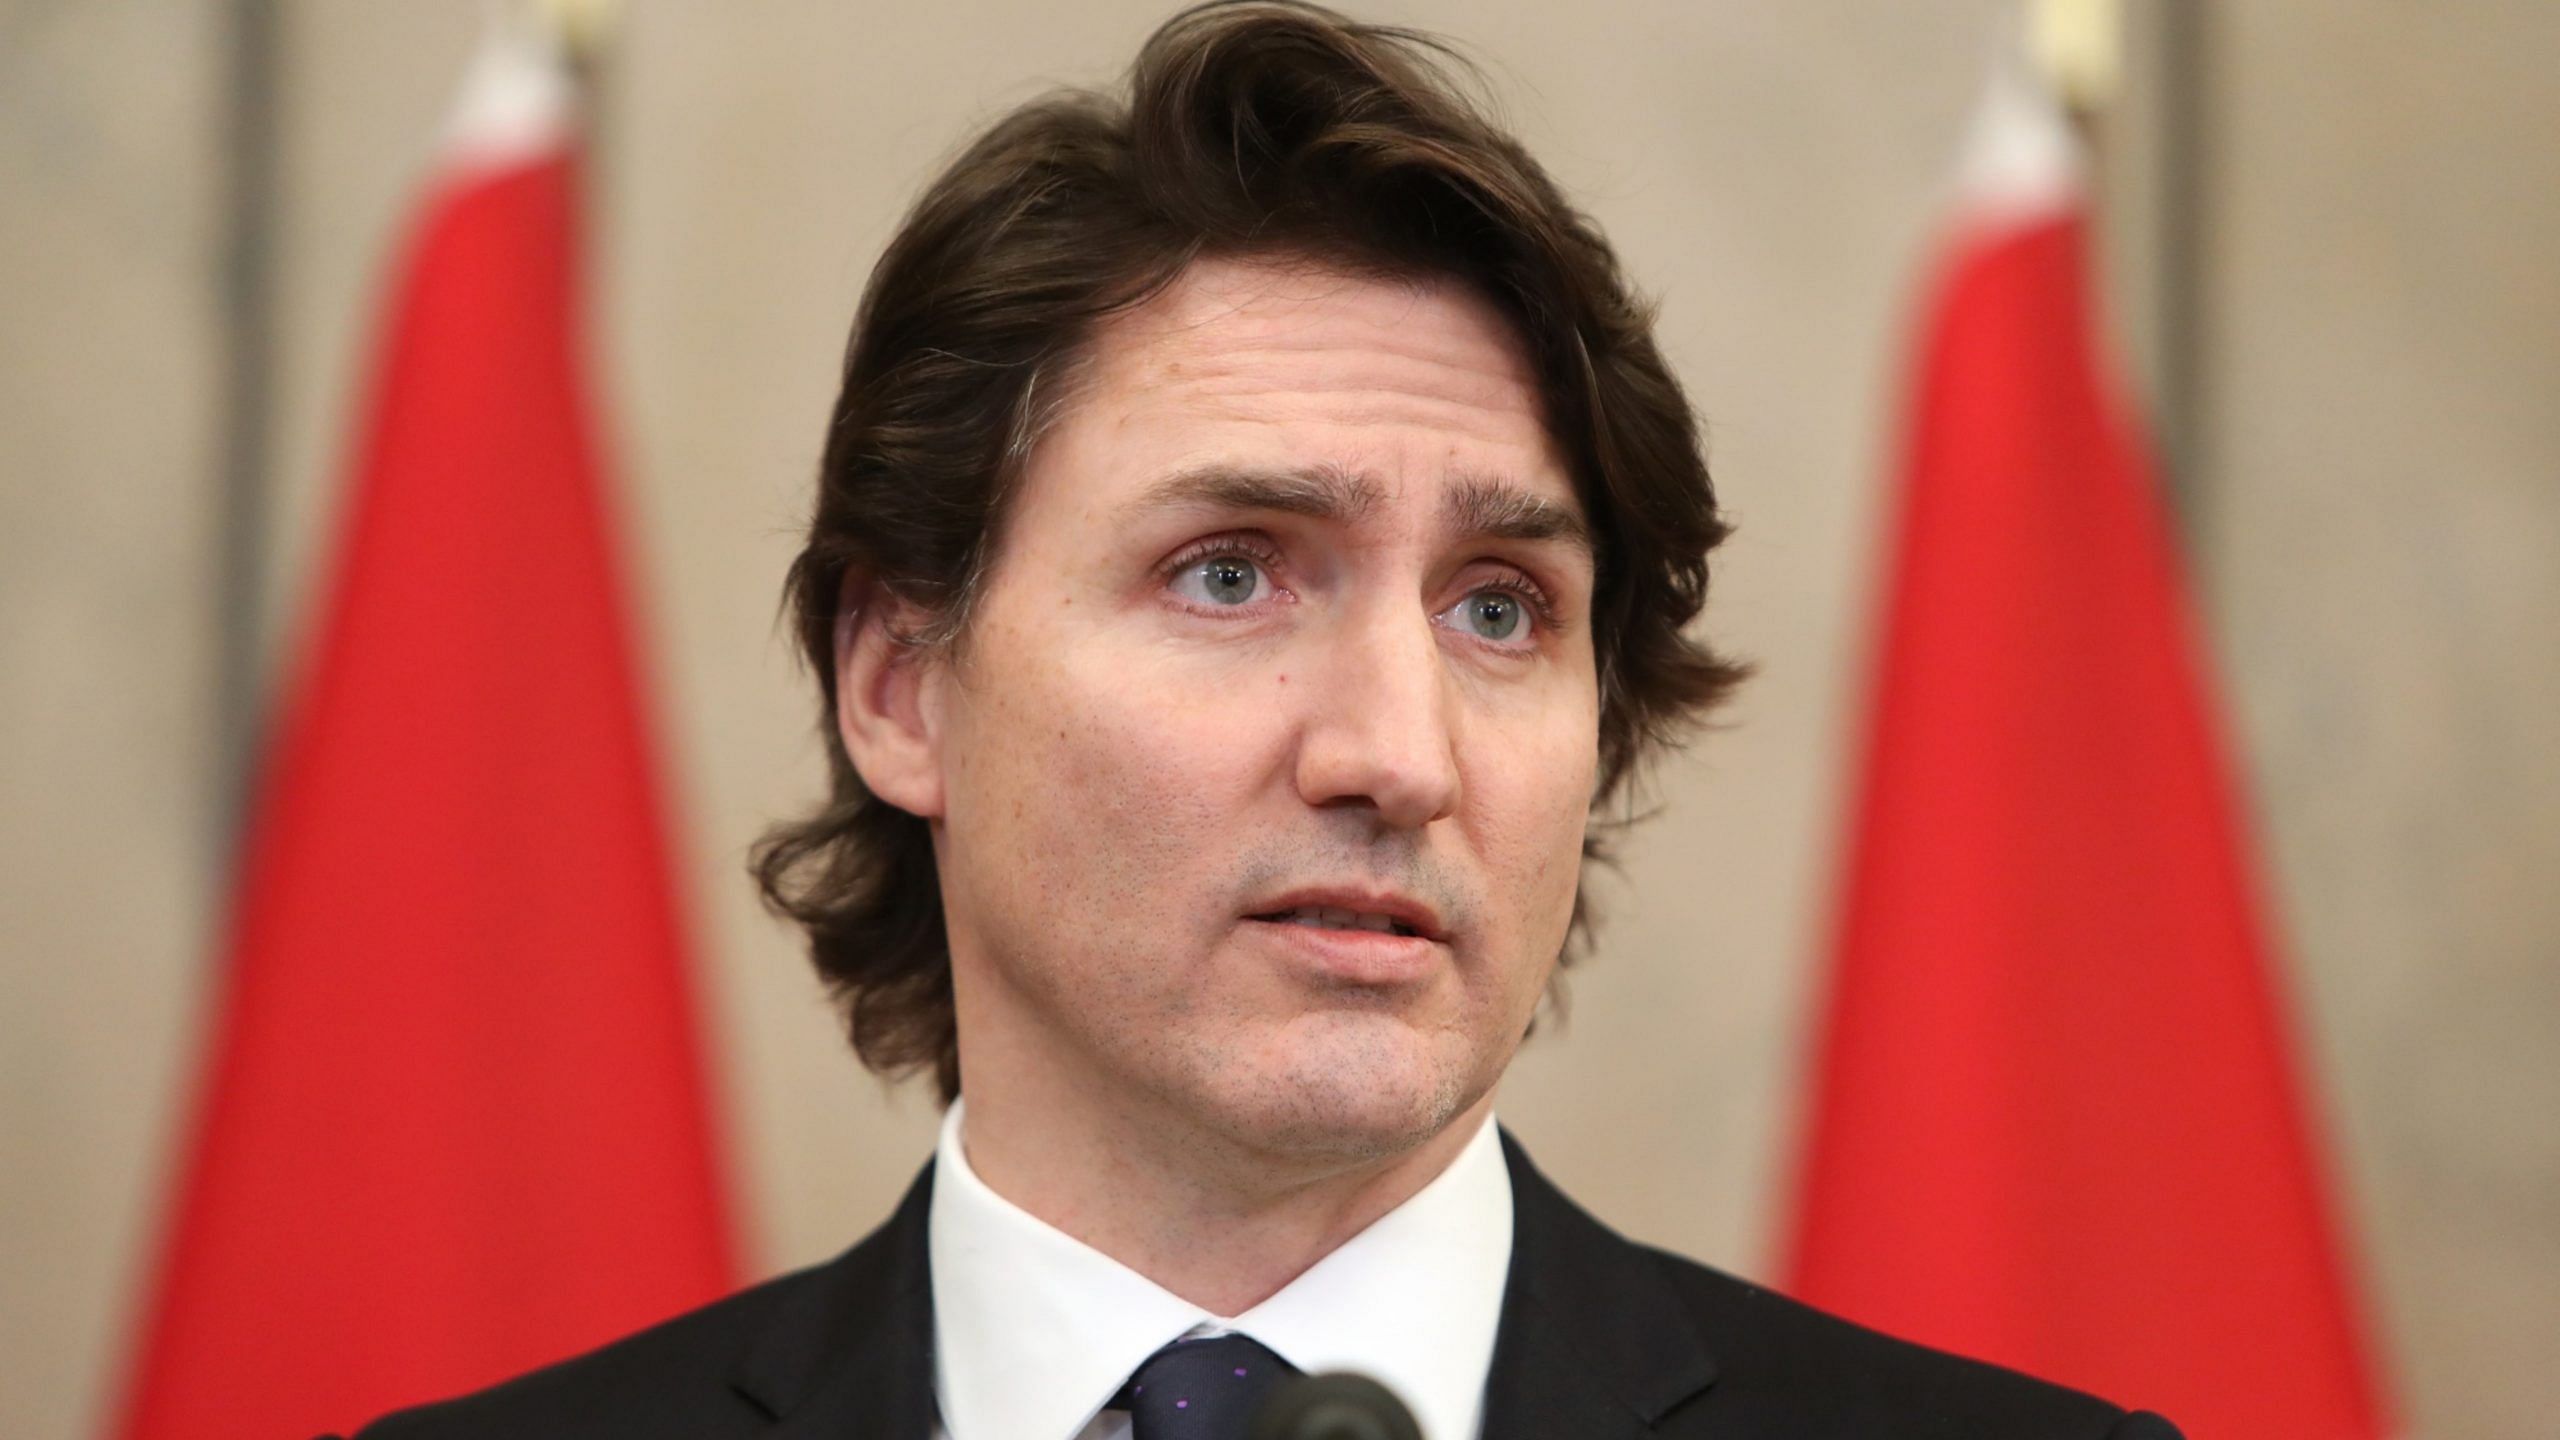 justin trudeau invokes emergency, seeks to choke off cash flow to protesters in canada